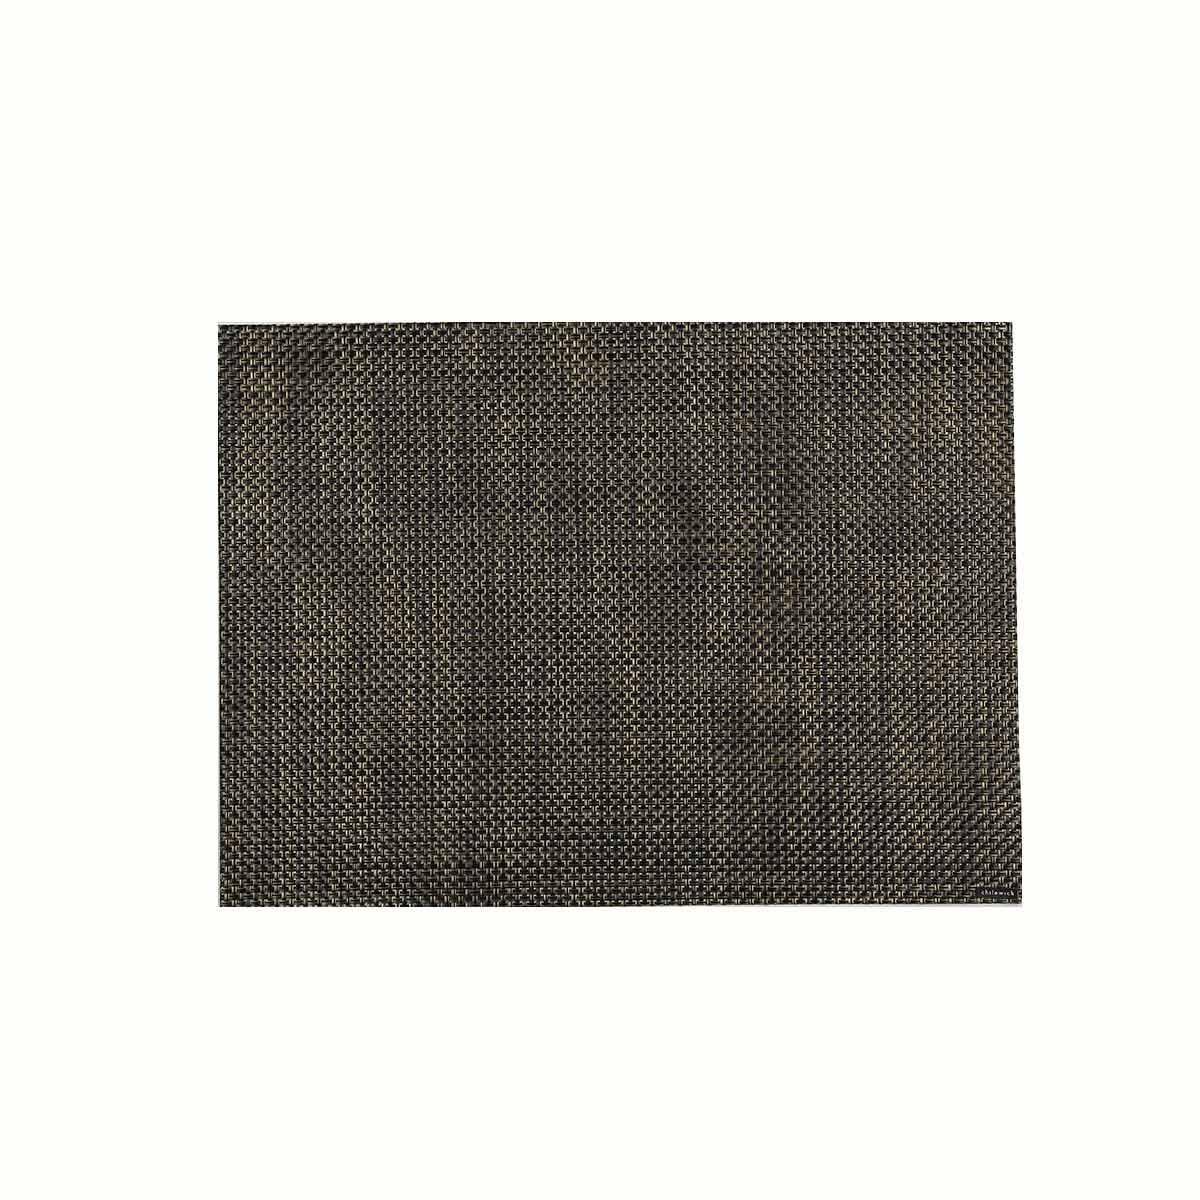 Chilewich Basketweave Table Mat Bl/Gd - Home4u